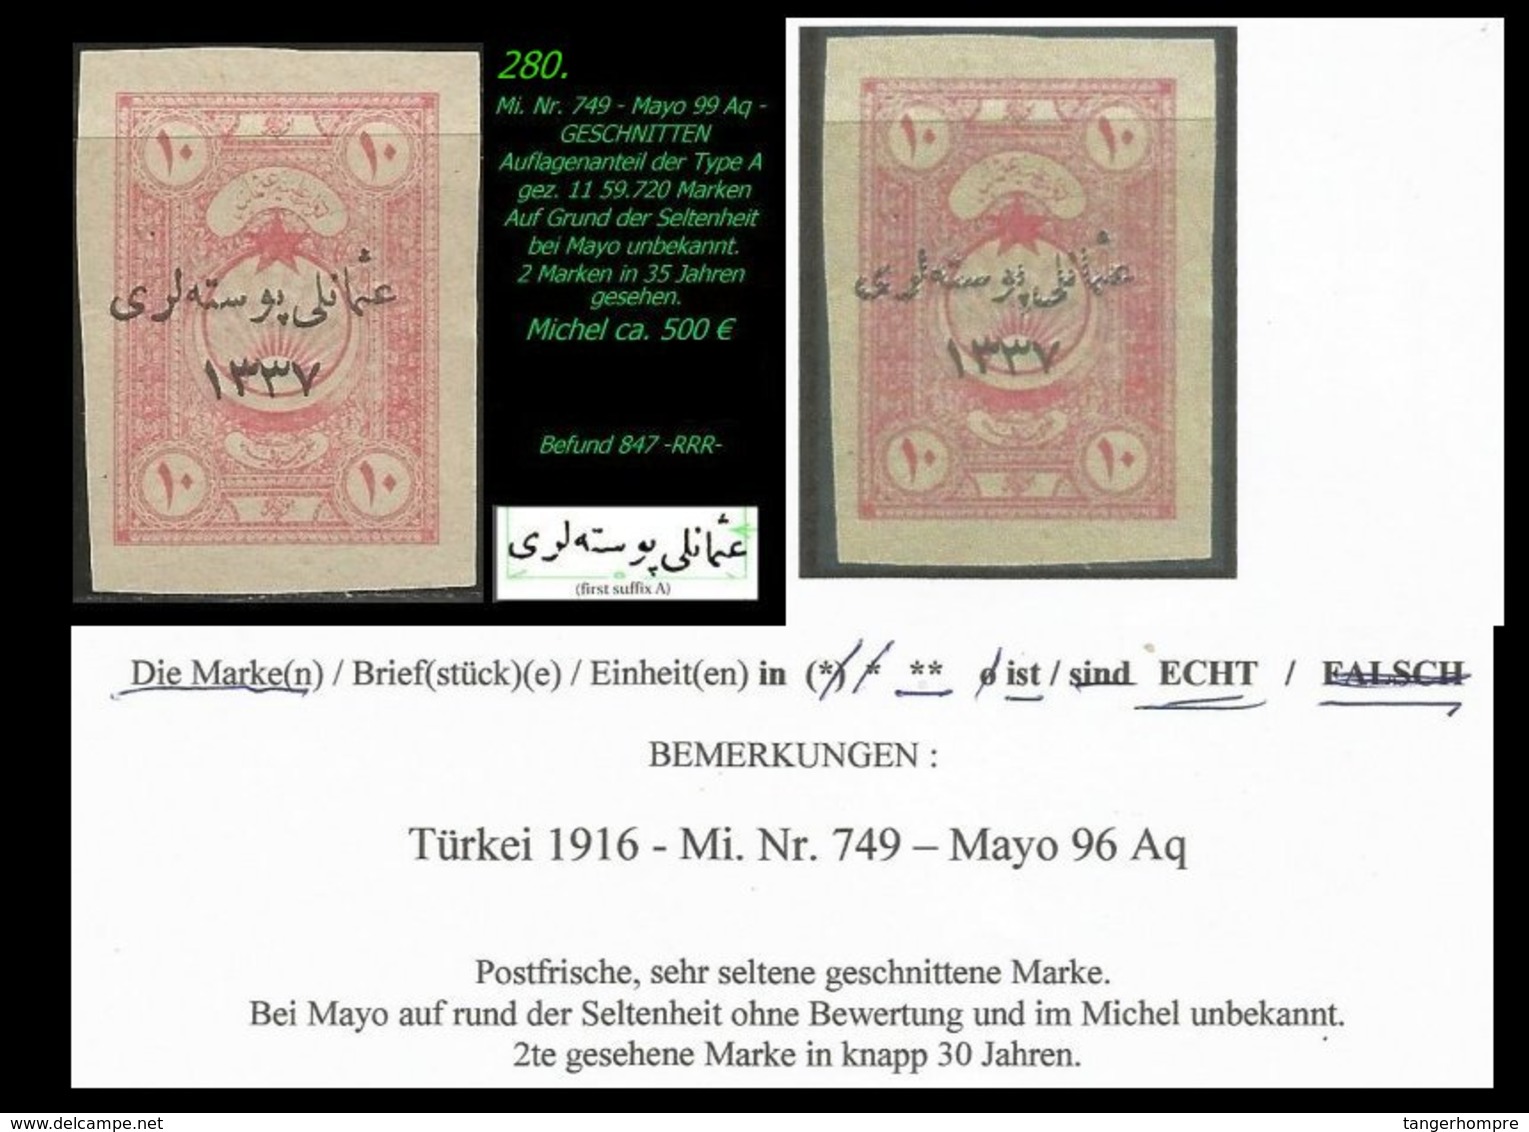 EARLY OTTOMAN SPECIALIZED FOR SPECIALIST, SEE...Mi. Nr. 749 - Mayo 99 Aq - Ungezähnt -RRR- - 1920-21 Anatolia